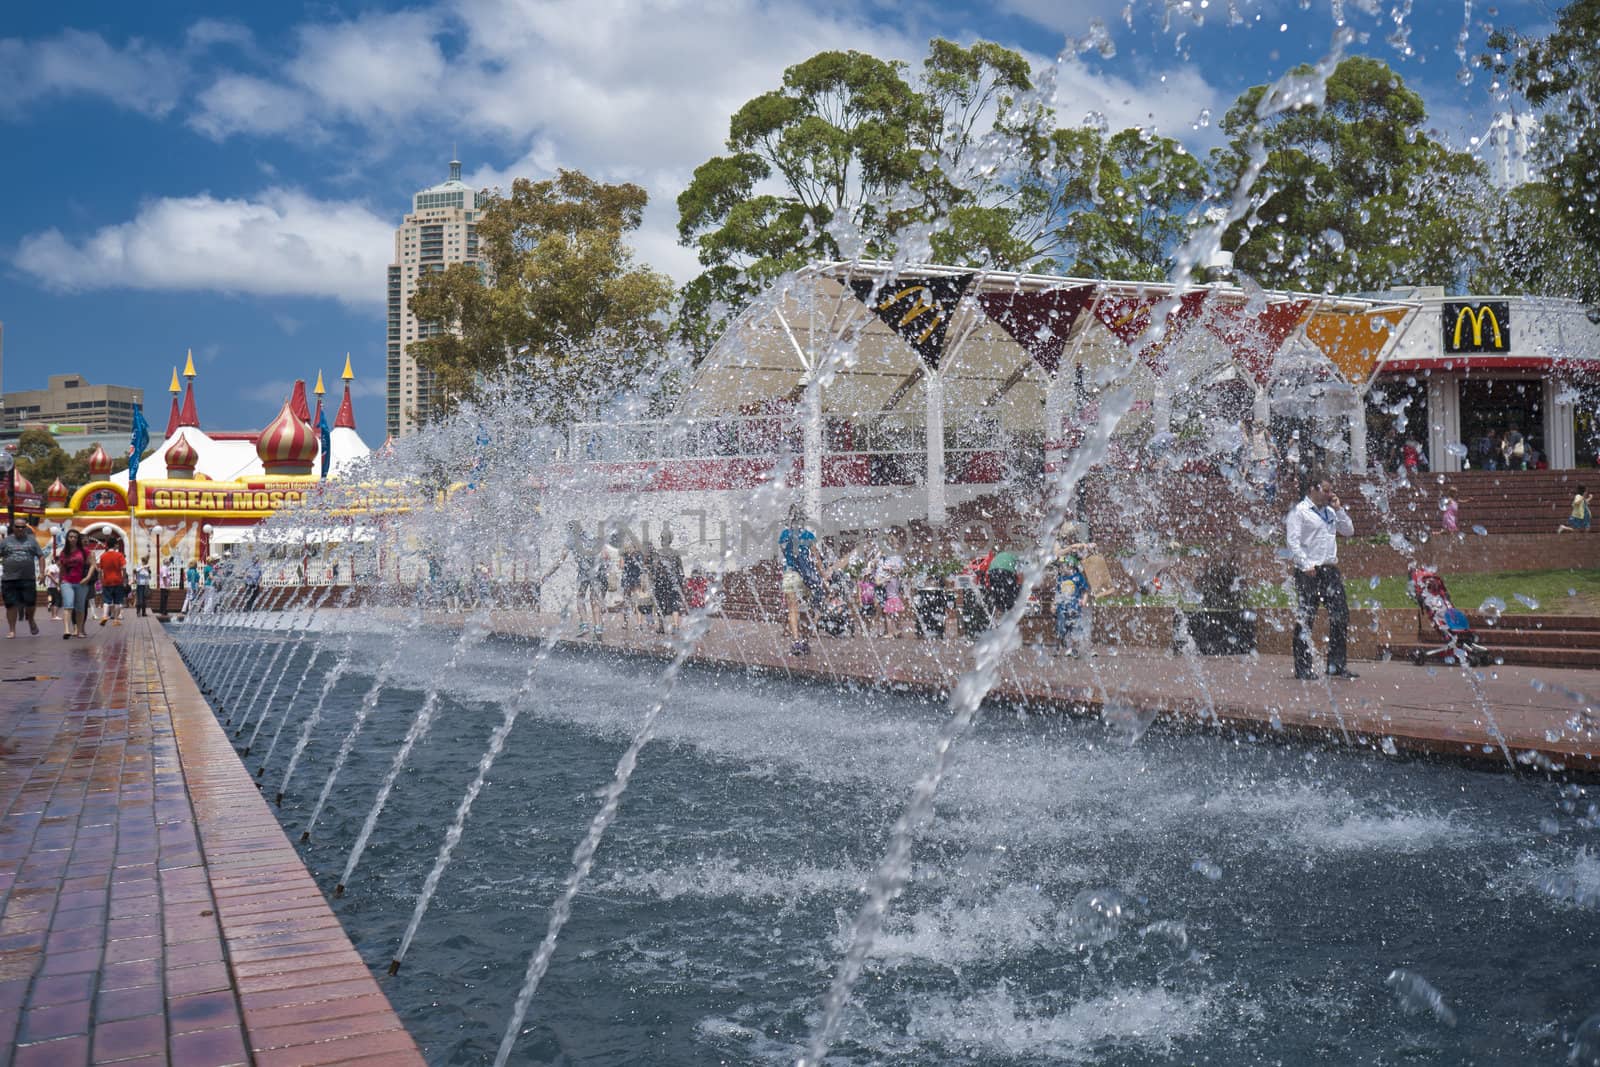 Sydney Waterfeature. by brians101